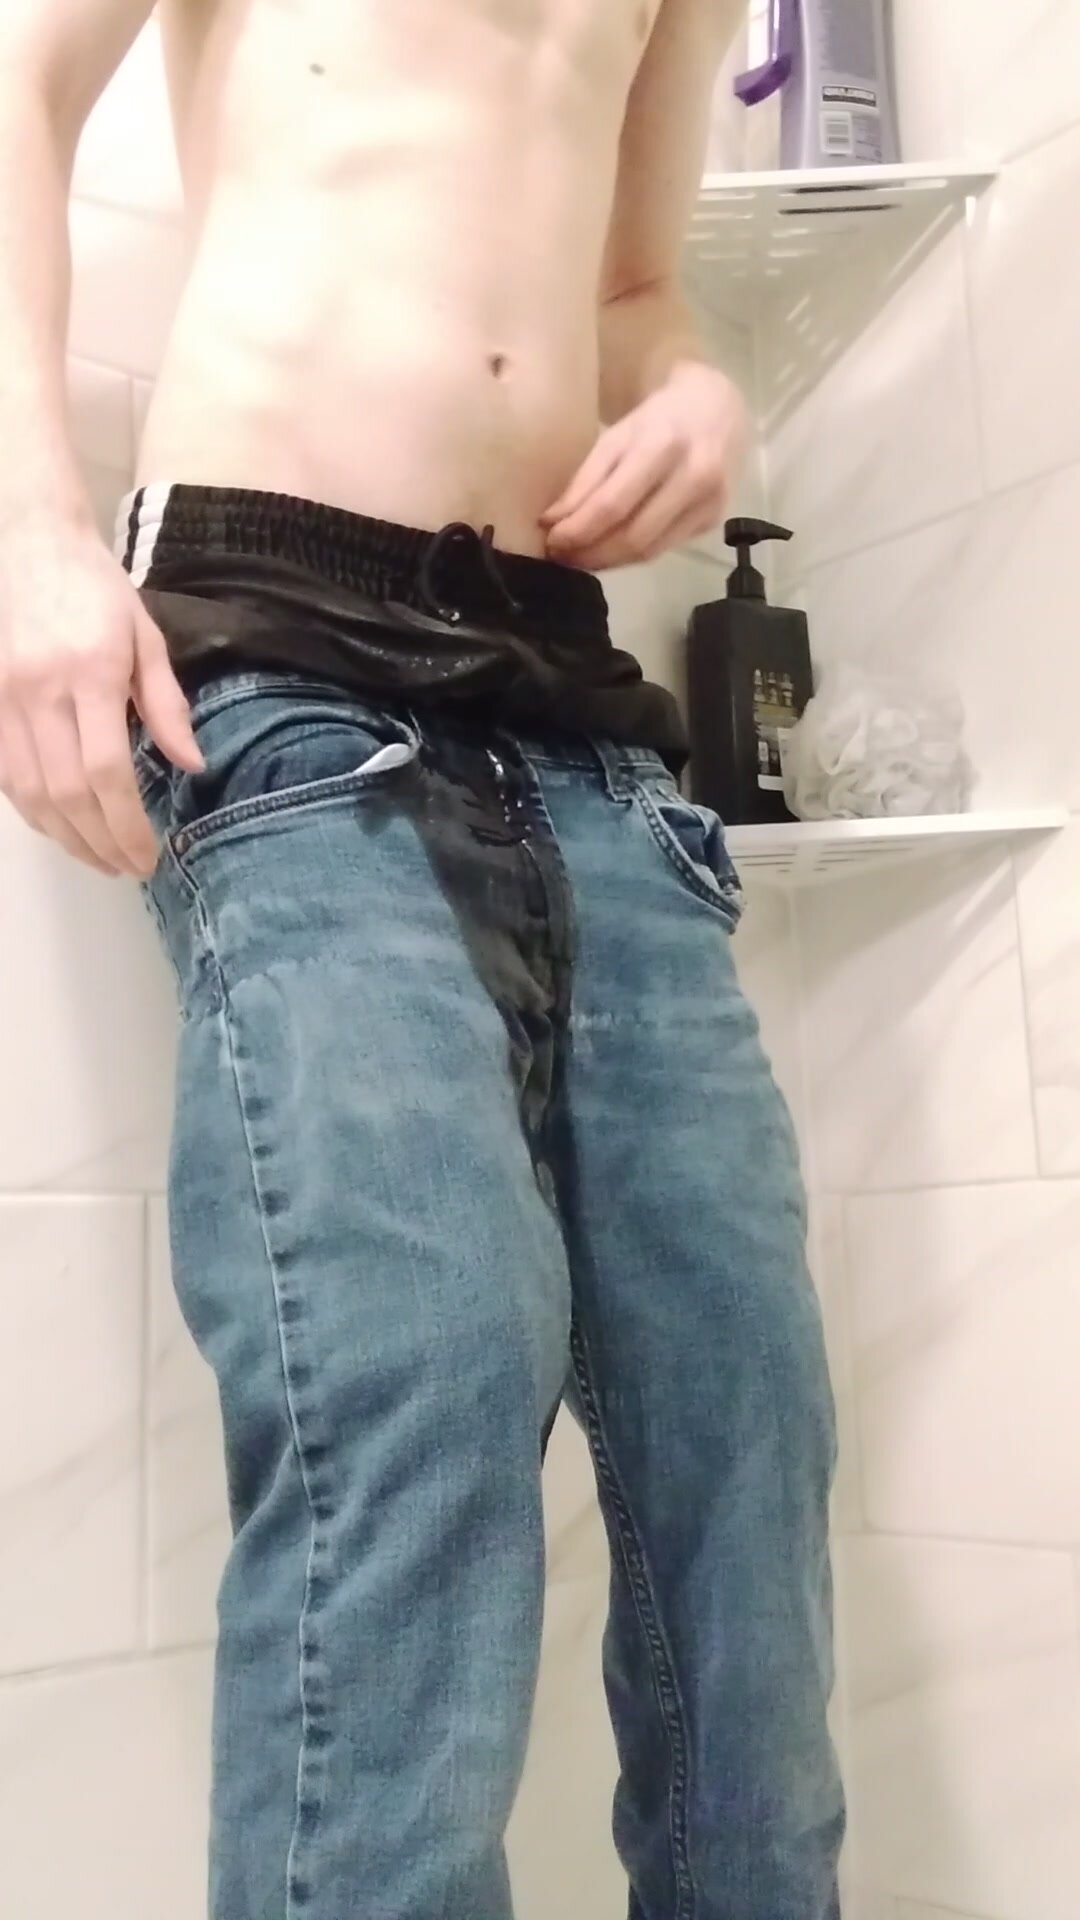 3rd Pissing in my everlast shorts and with jeans